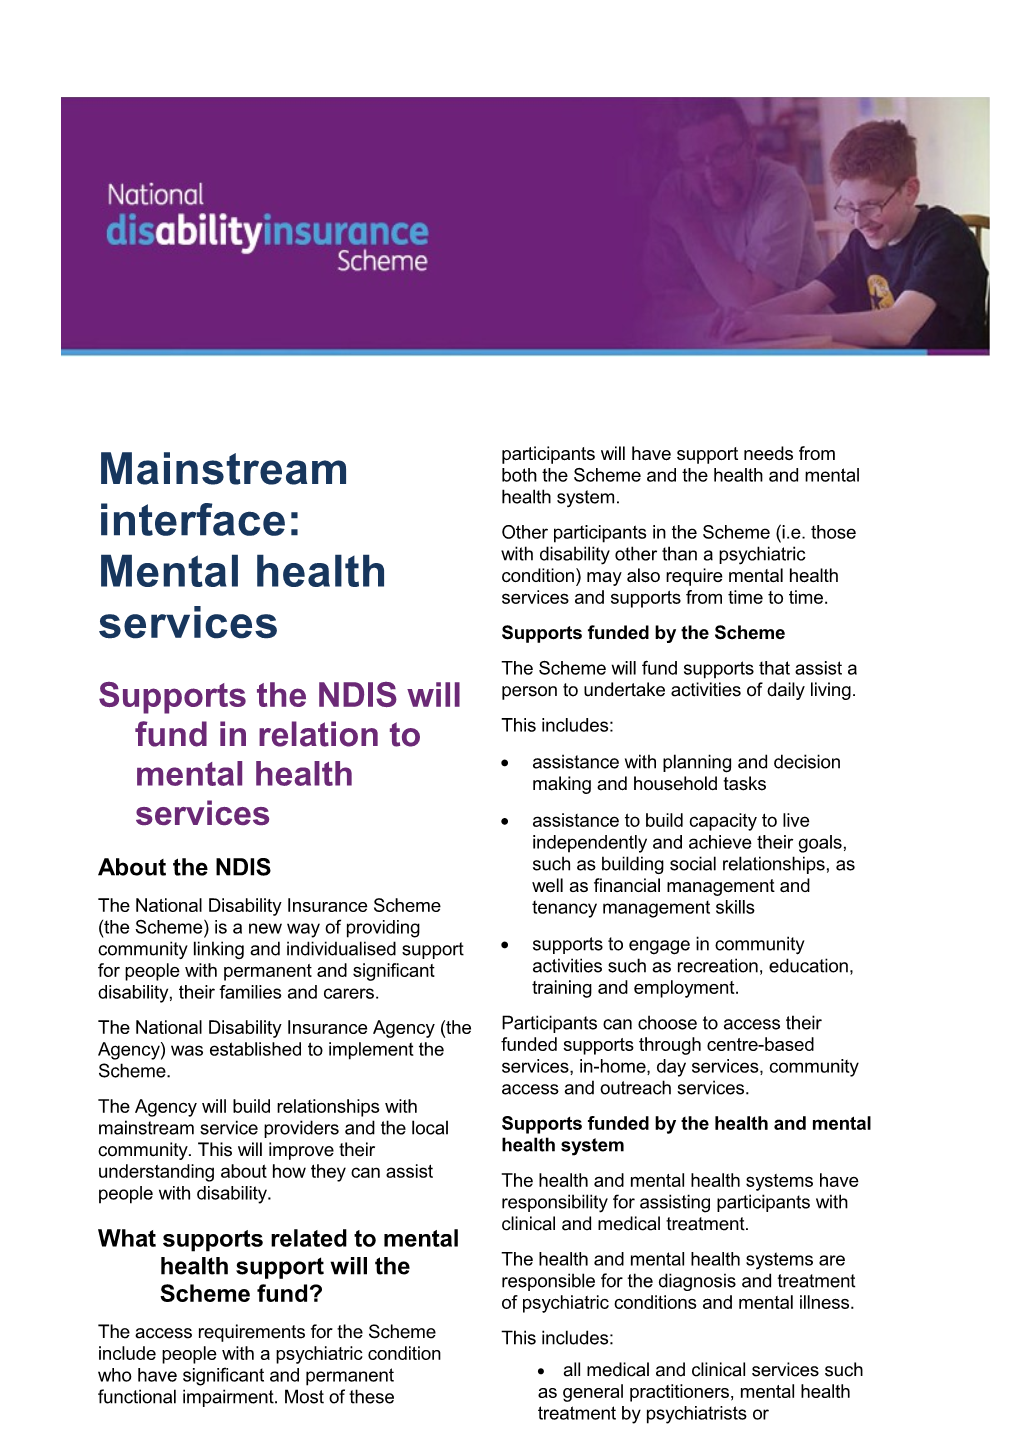 Fact Sheet: Supports the NDIS Will Fund in Relation to Mental Health Services